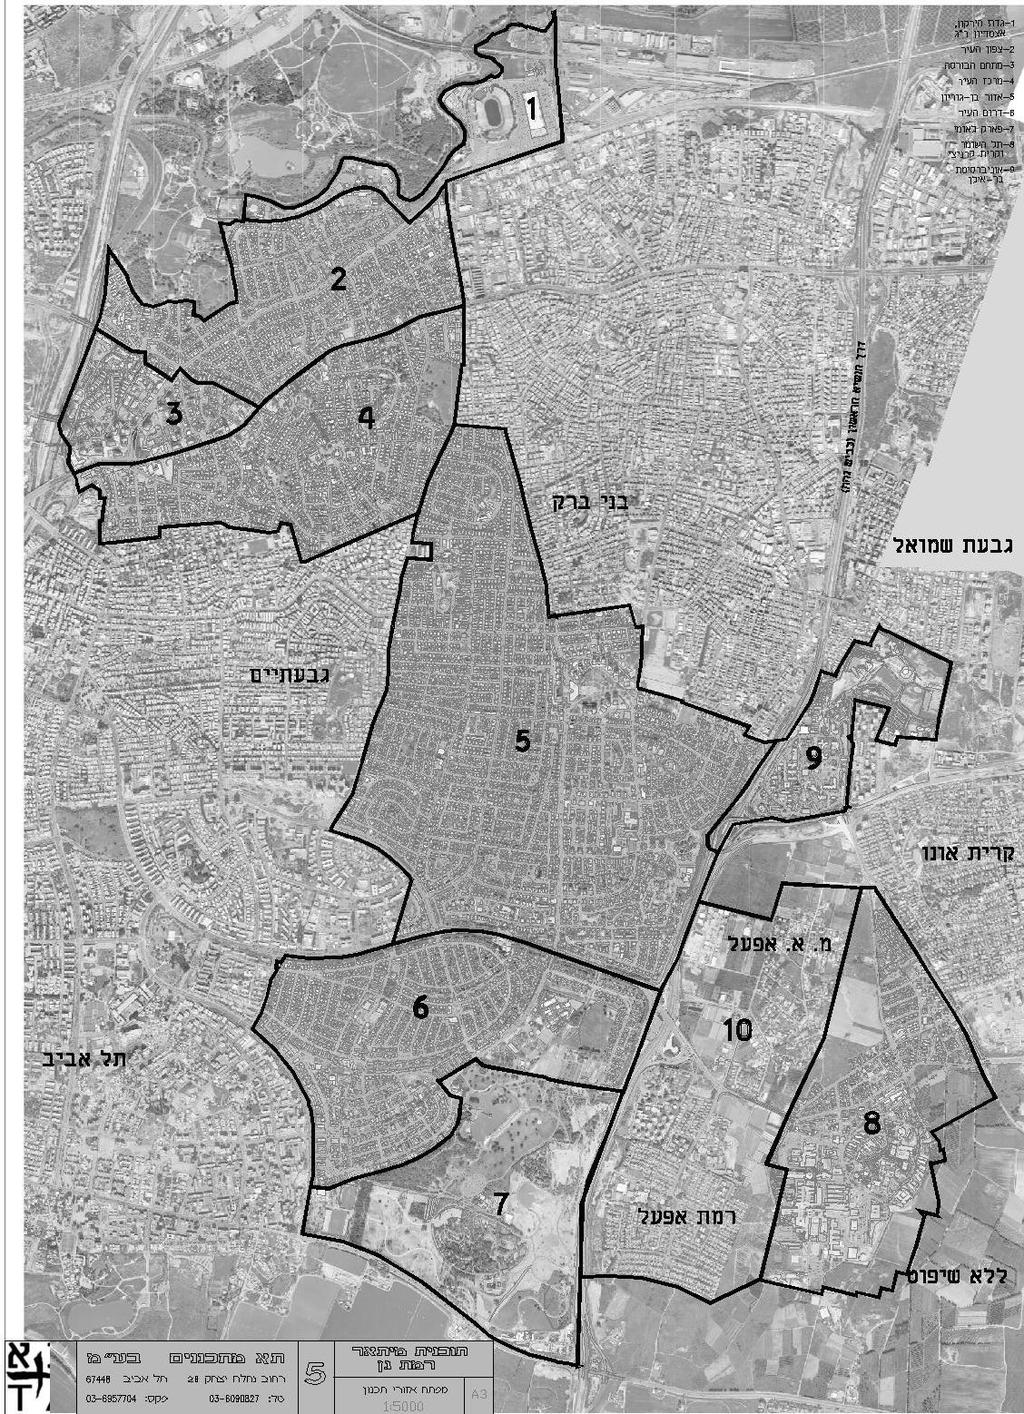 For many years, cities like Ramat-Gan approved plans that had gross dwelling densities of 60 units per hectare and net dwelling density of 10 units per hectare.